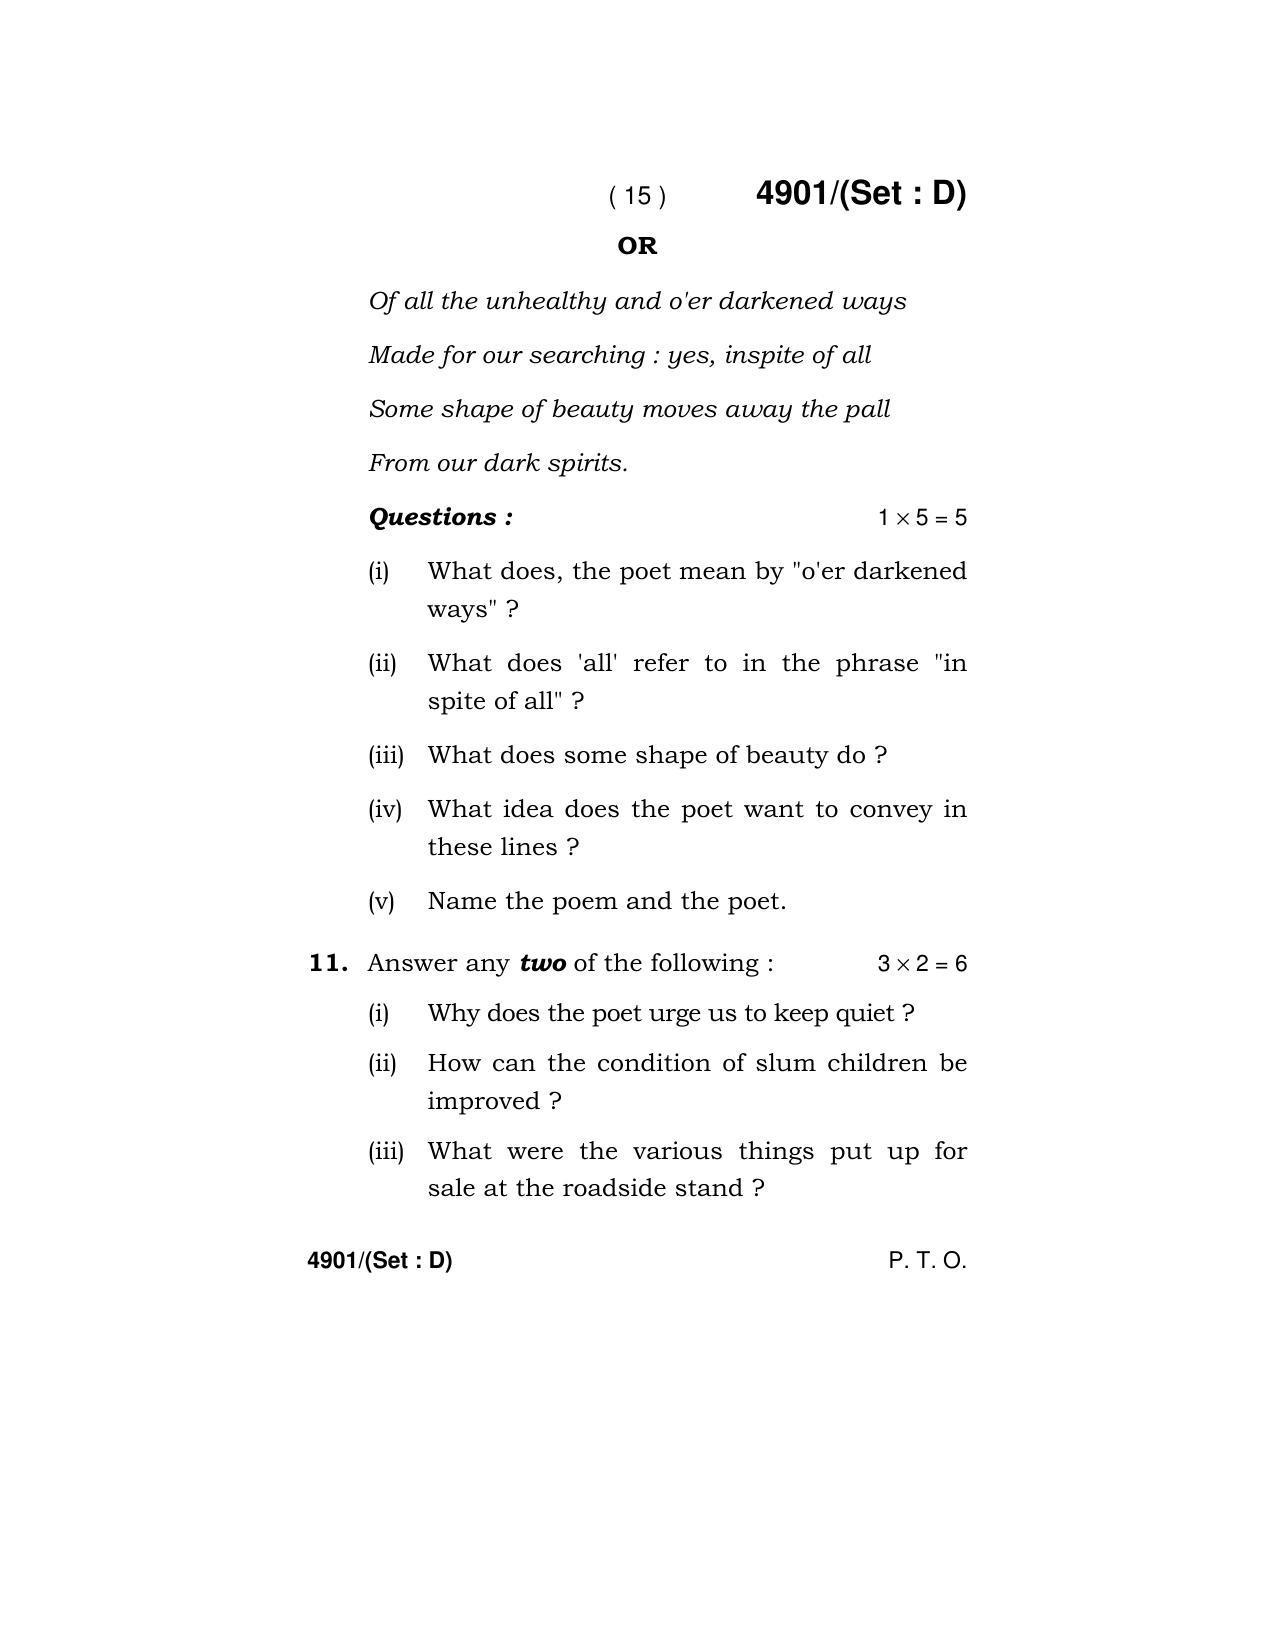 Haryana Board HBSE Class 12 English Core 2020 Question Paper - Page 63